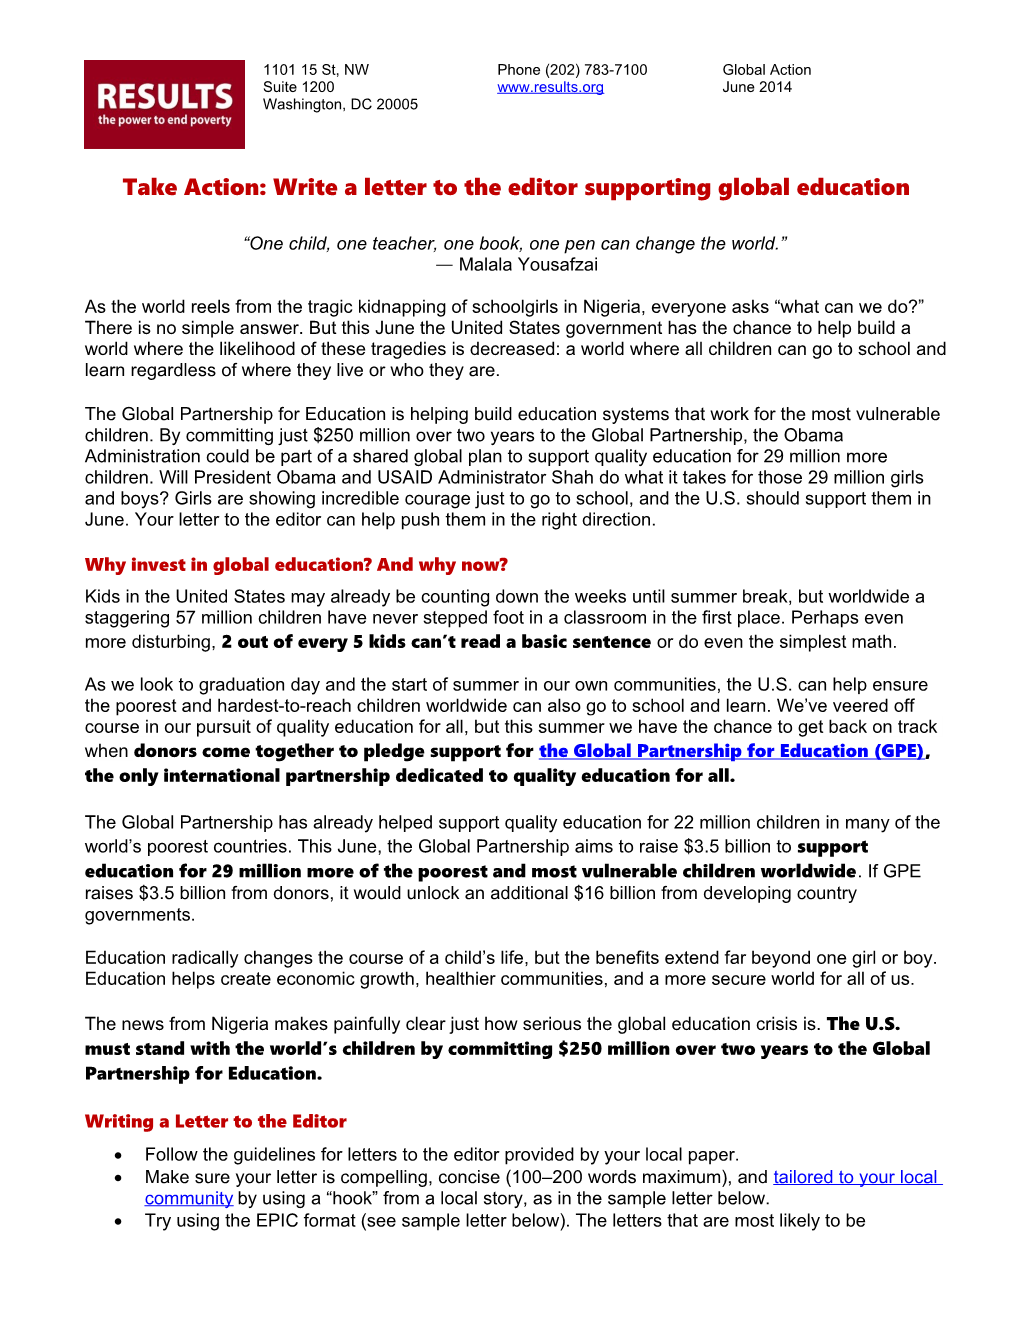 Take Action: Write a Letter to the Editorsupporting Global Education